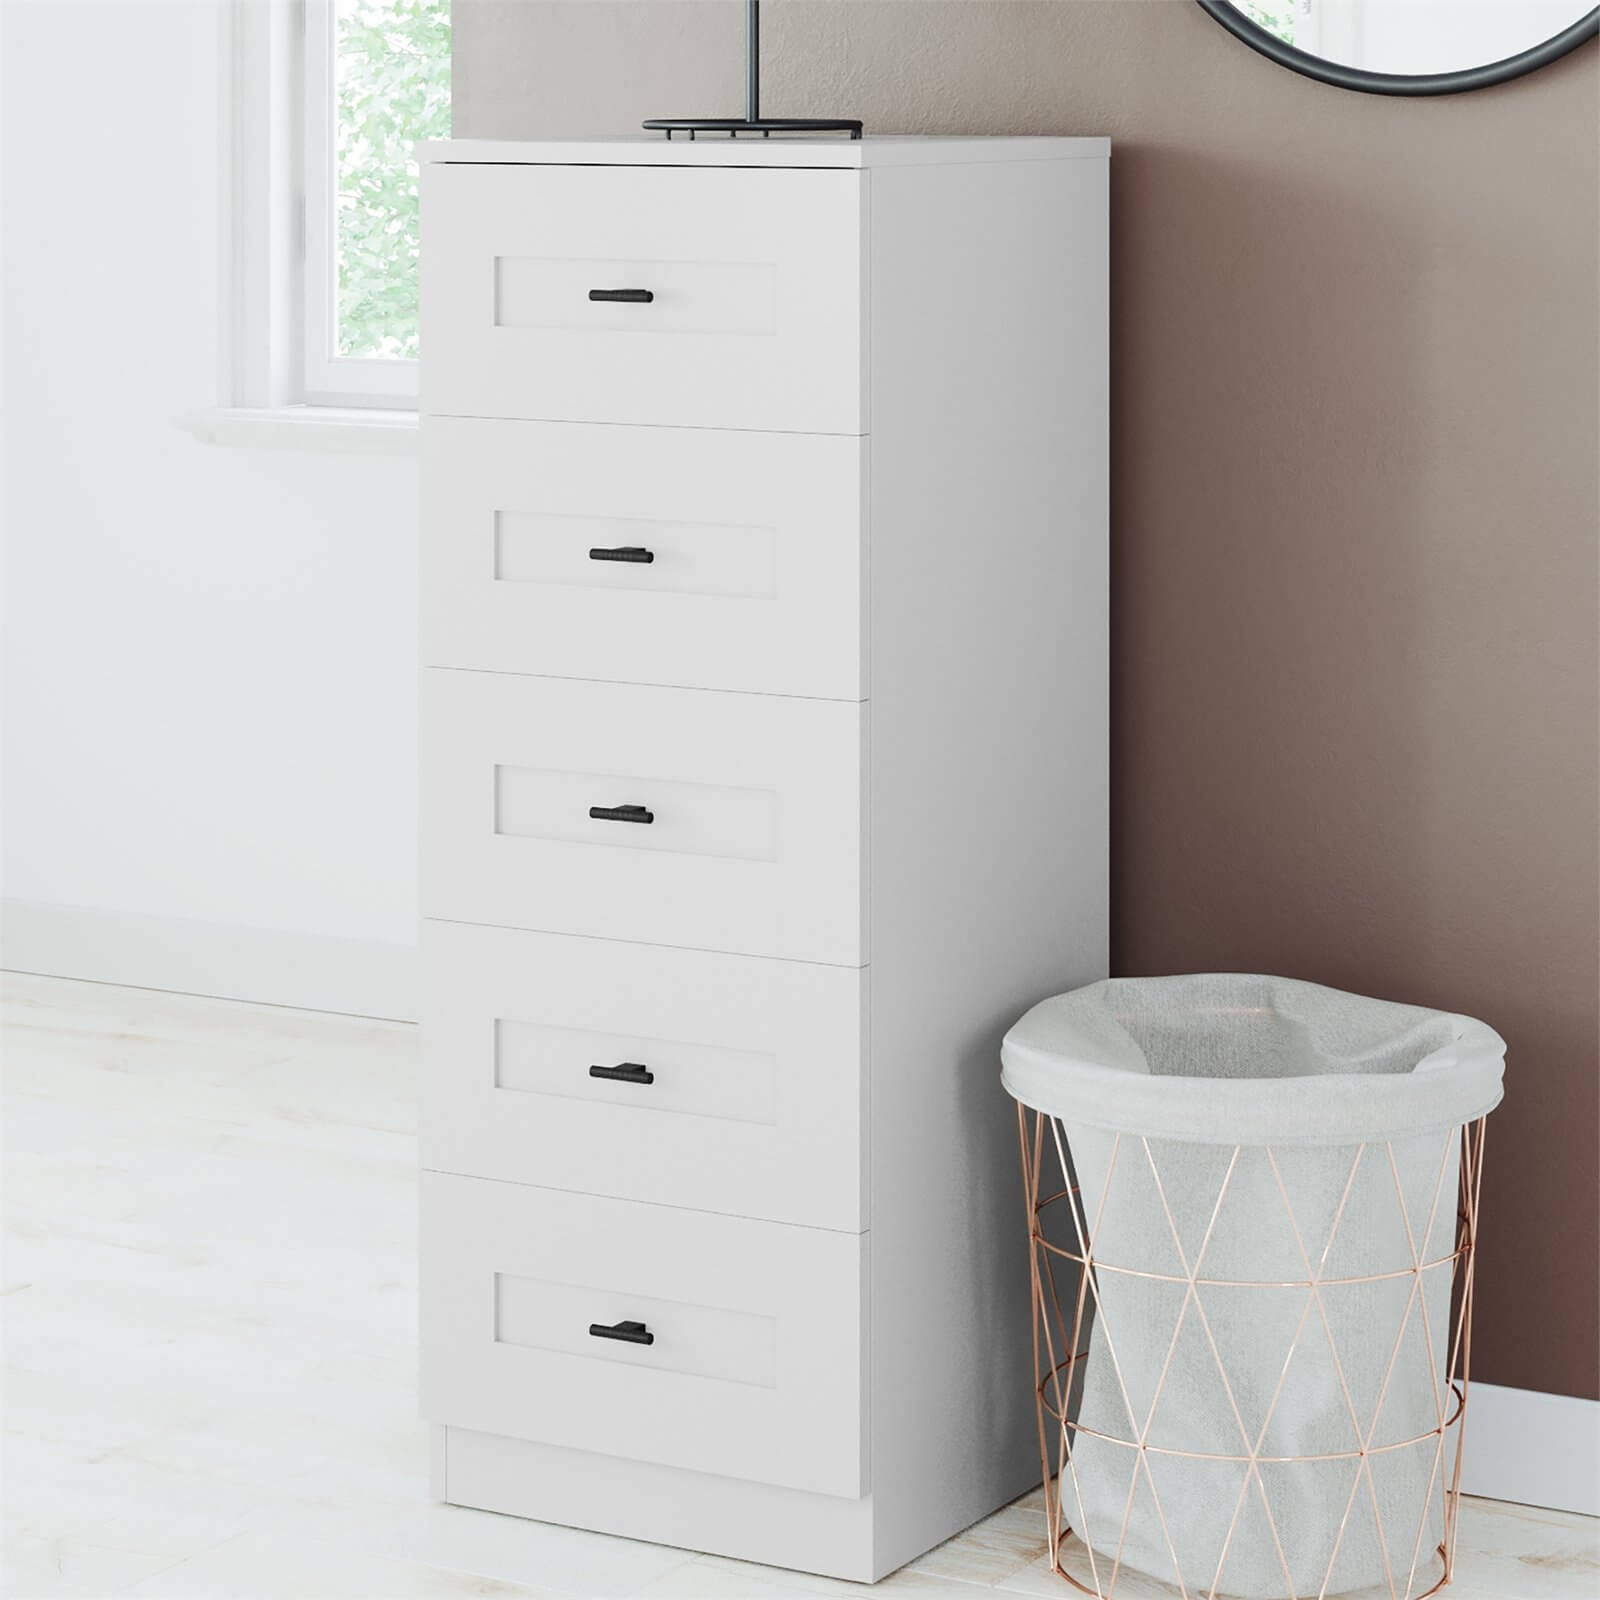 Fitted Bedroom Shaker 5 Drawer Chest - Grey